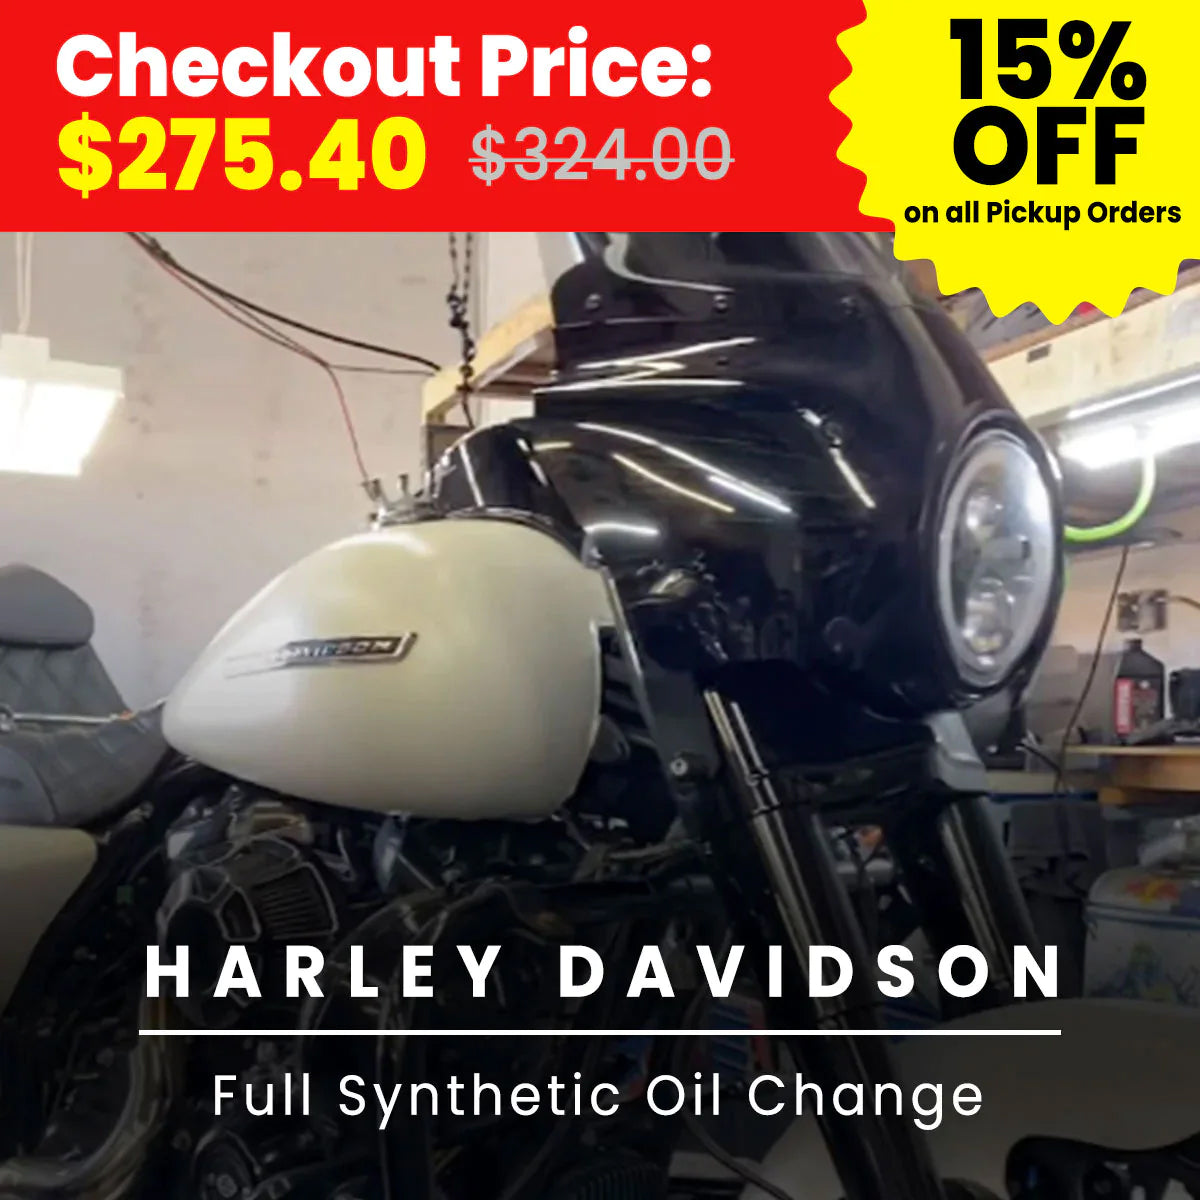 Motorcycle Harley Davidson Full Synthetic Oil Change Service (At Location: Fullerton CA)